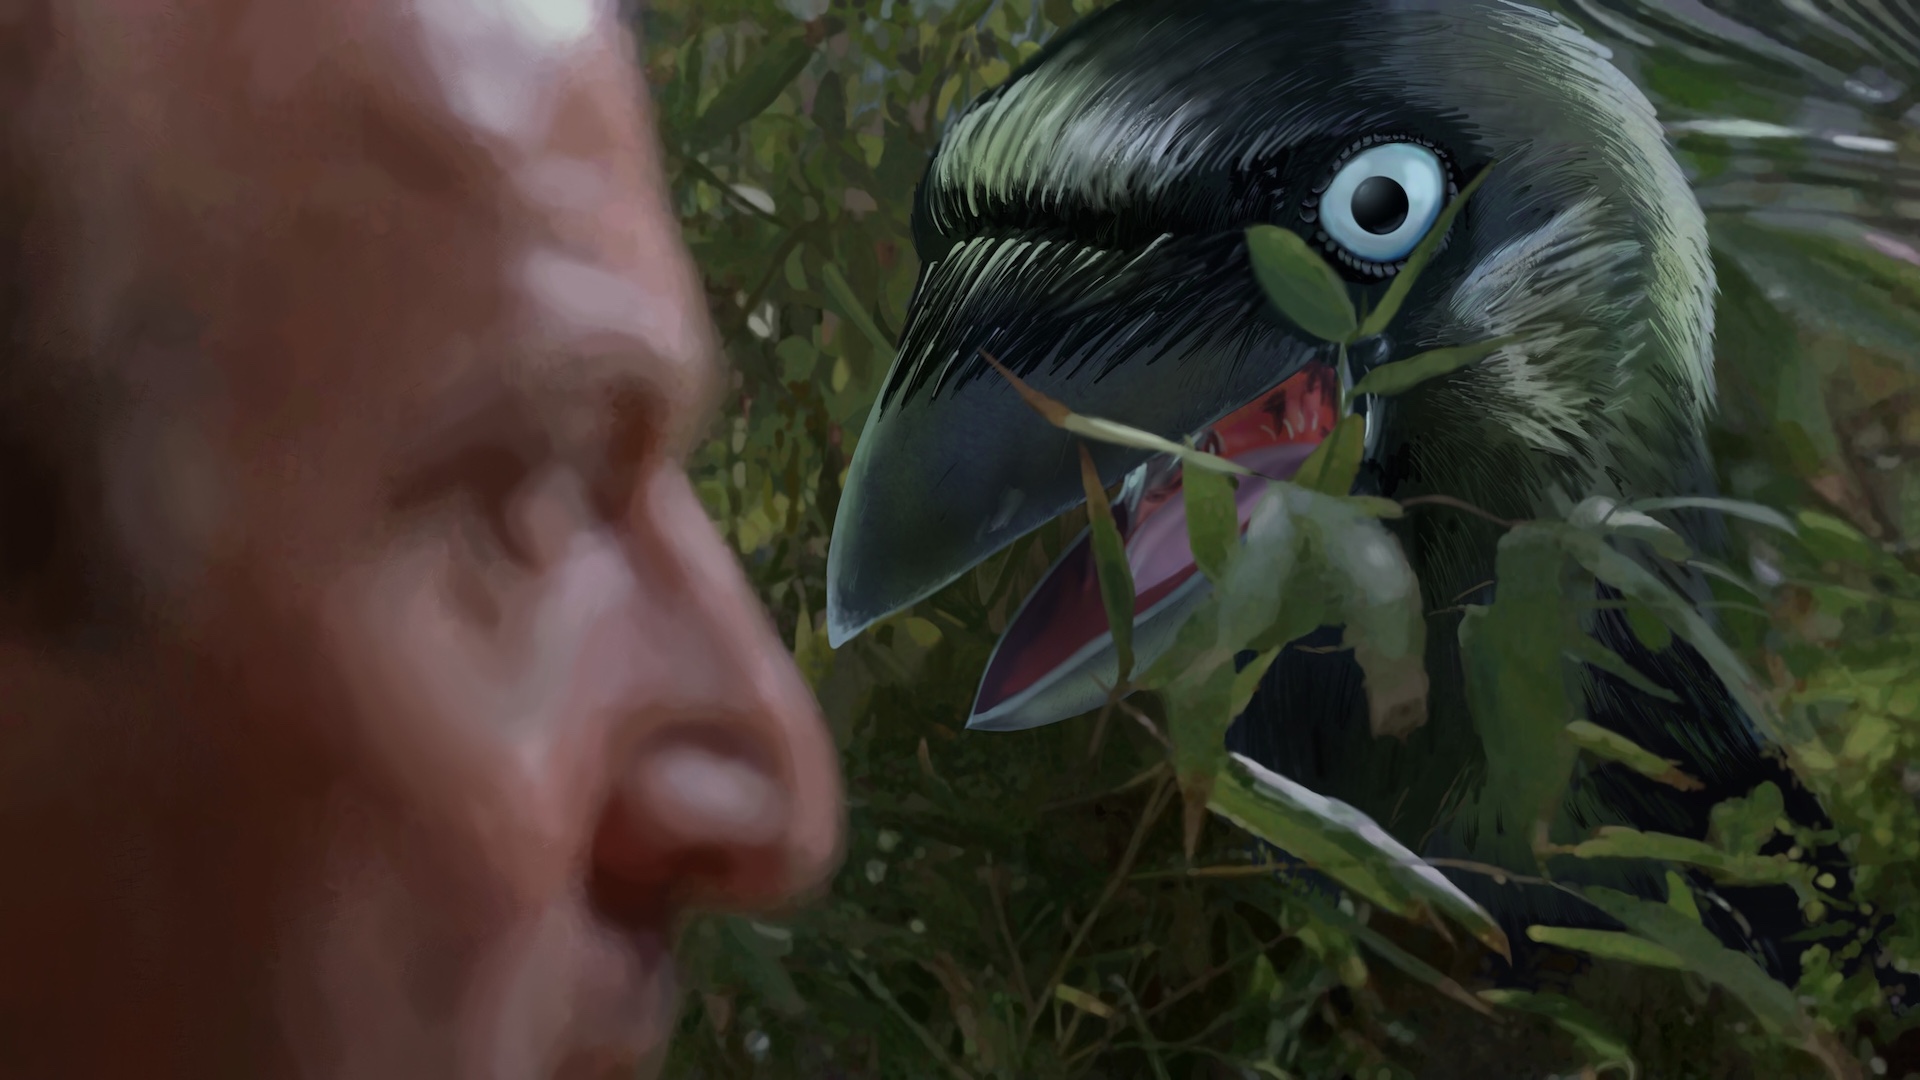 Digitally painted reproduction of of a frame from Jurassic Park, except instead of a velociraptor peeking out of the bushes, it's a giant jackdaw.'